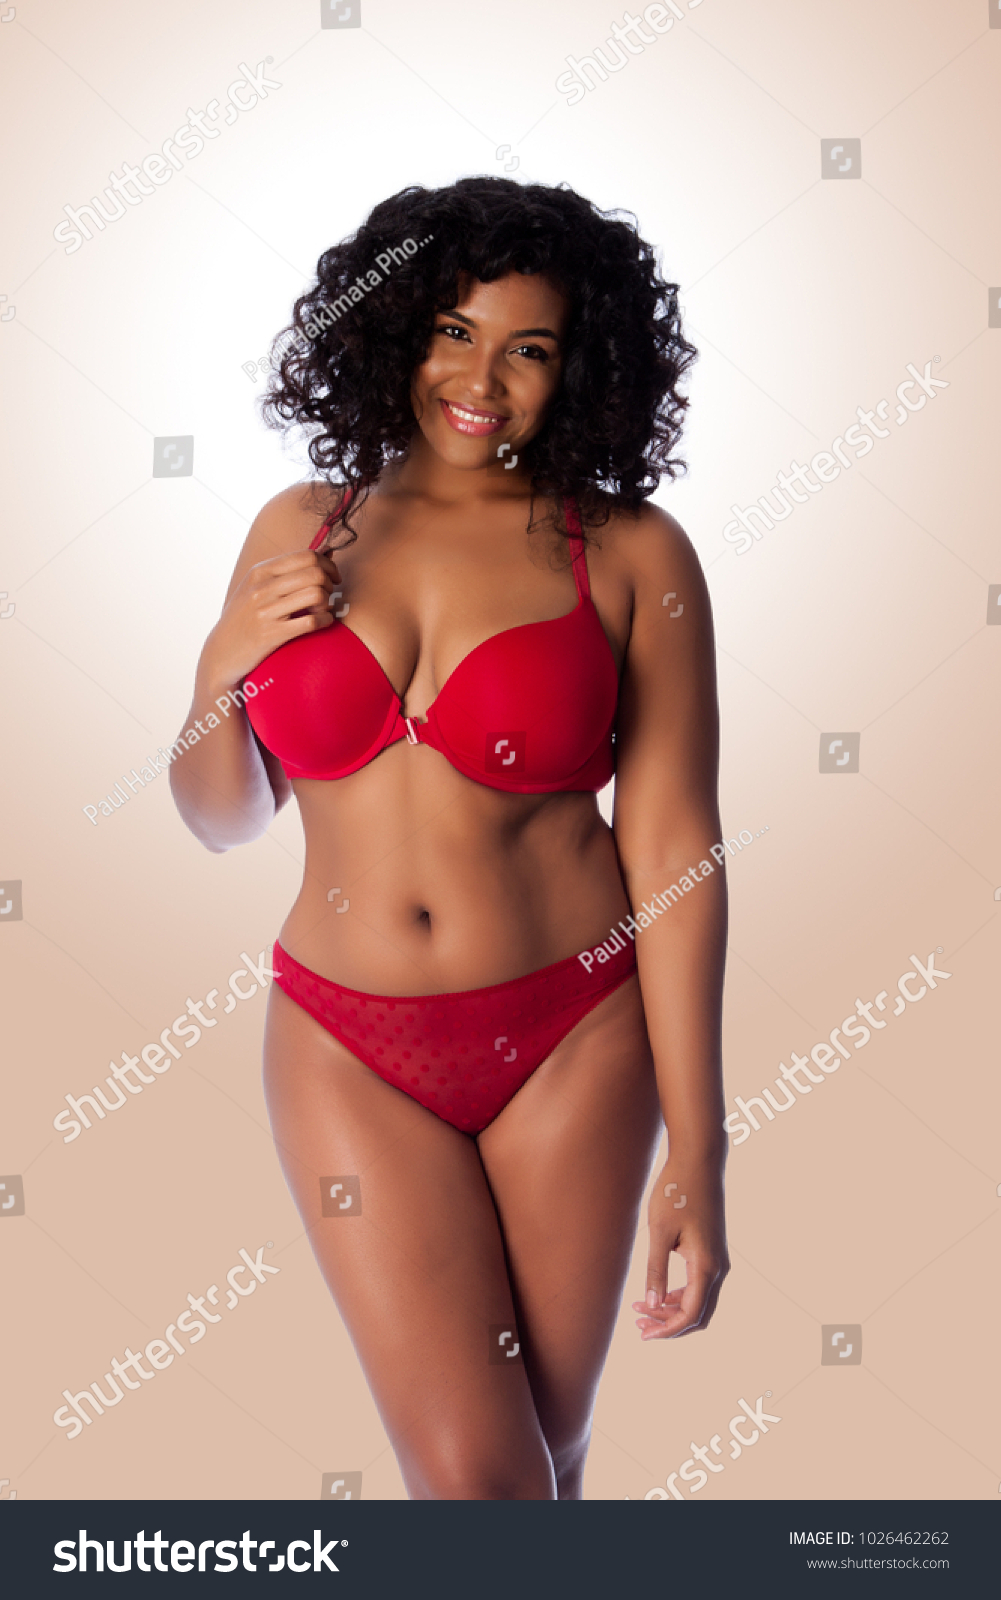 Full figured women in lingerie gallery Beautiful Happy Plus Size Sexy Woman Stock Photo Edit Now 1026462262